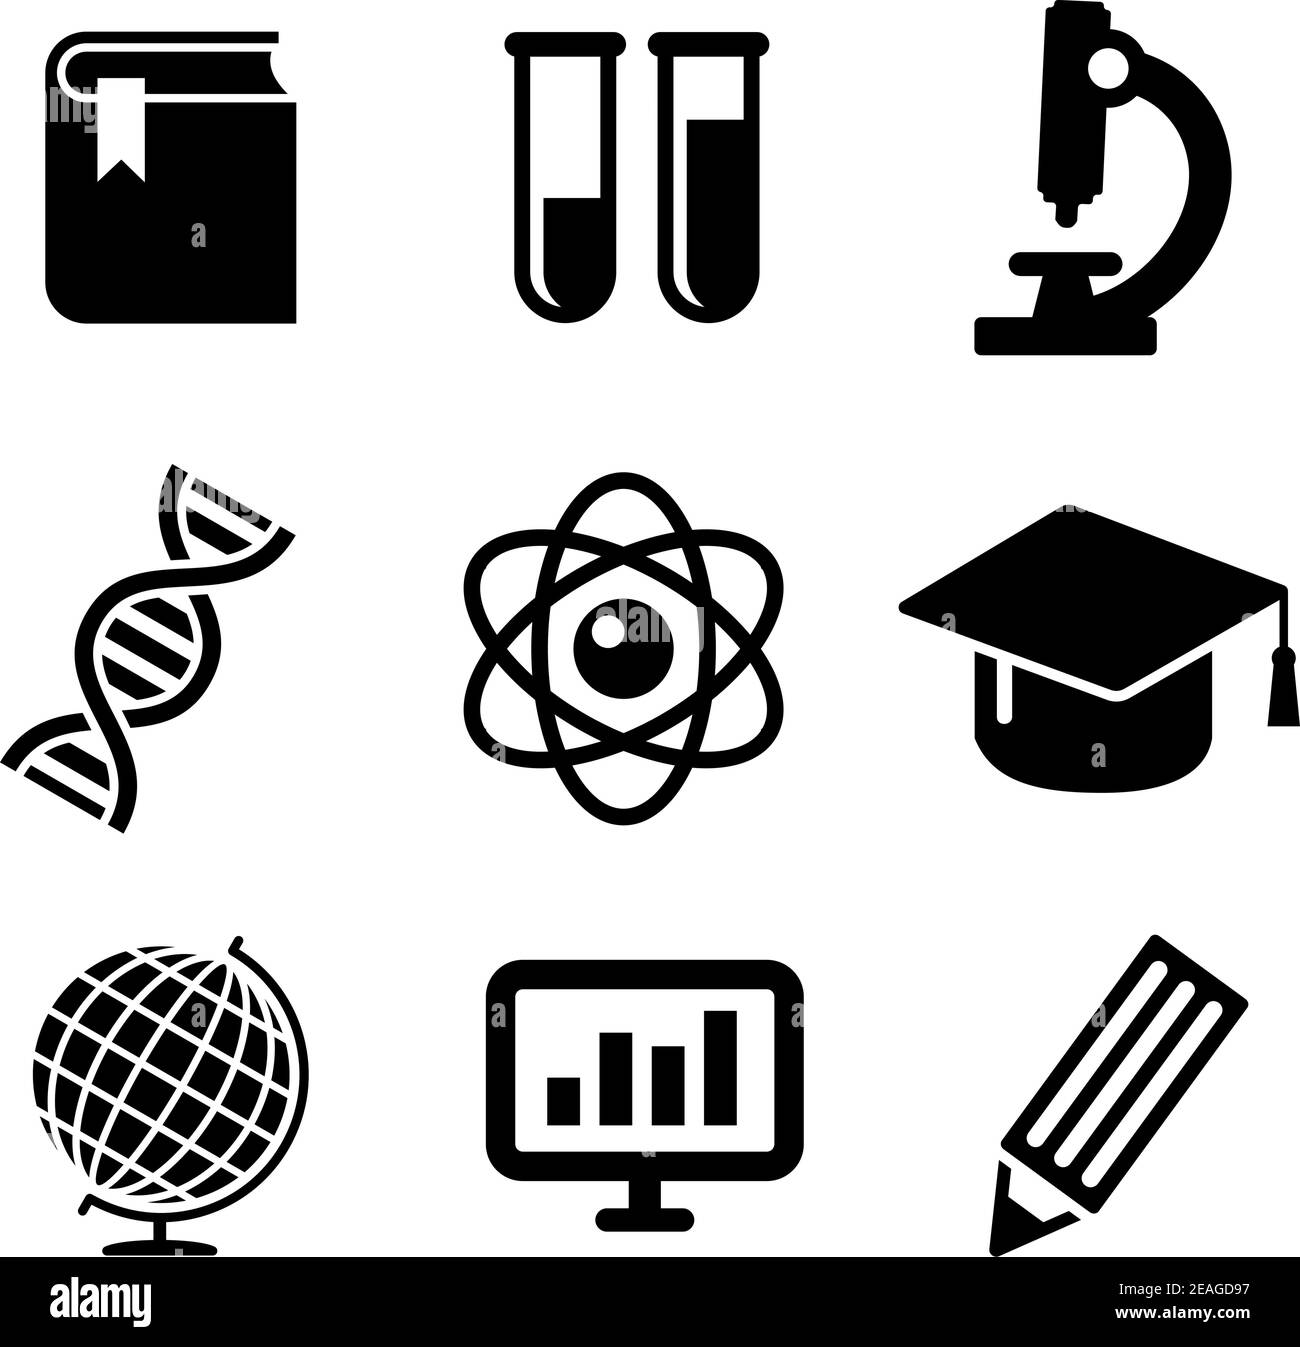 Science and education icons depicting book, test tubes, DNA, graduation, microscope, atom, pencil, globe and computer Stock Vector